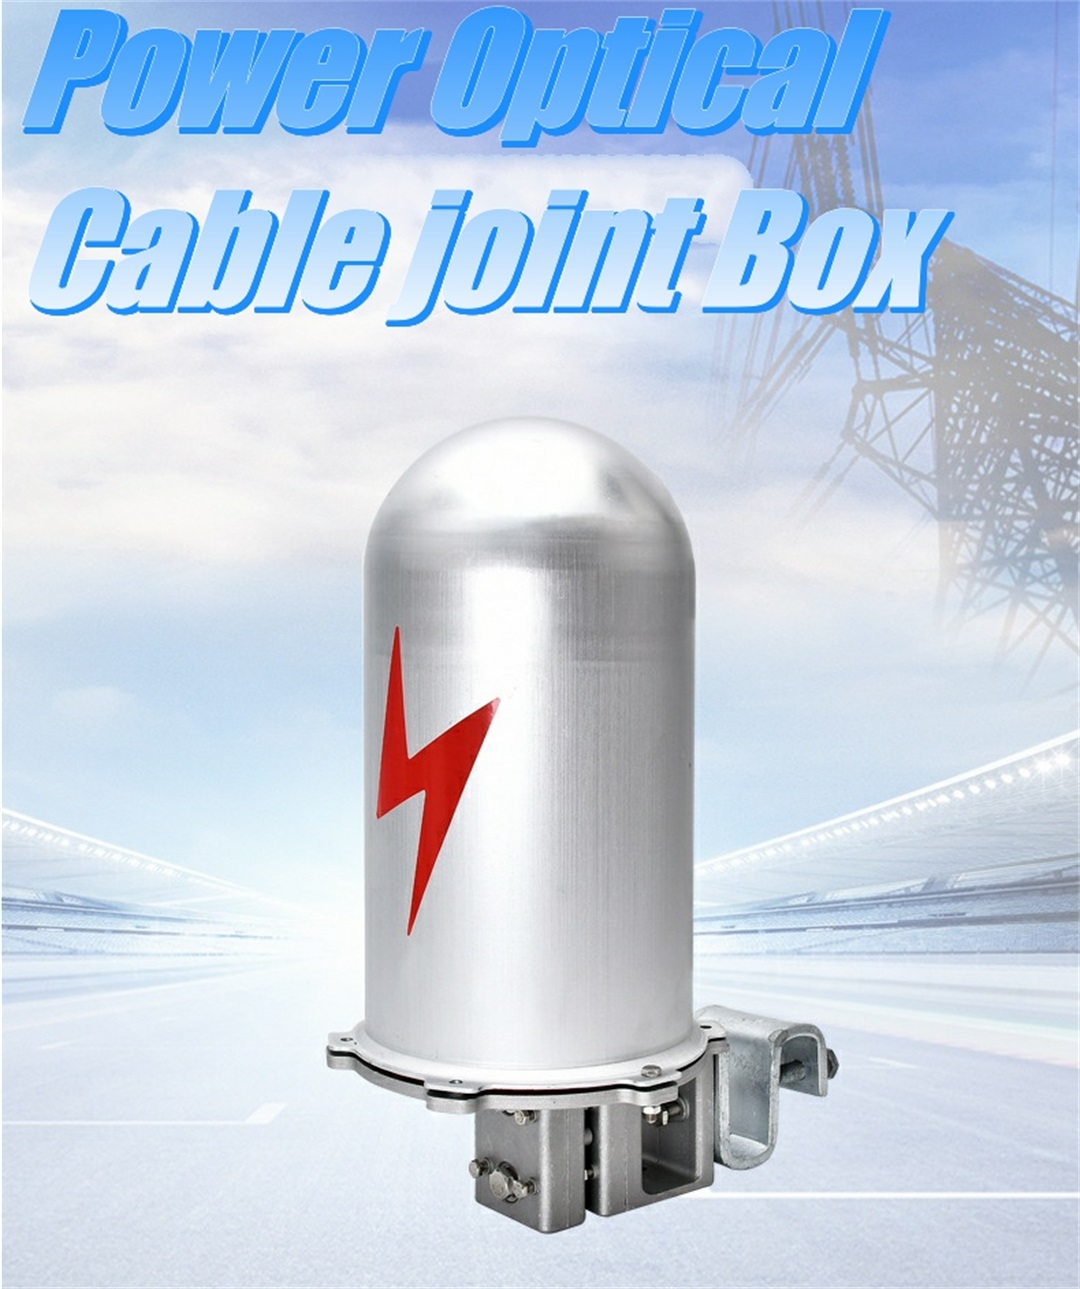 Power optical cable joint box, Optical fiber terminal connection junction box